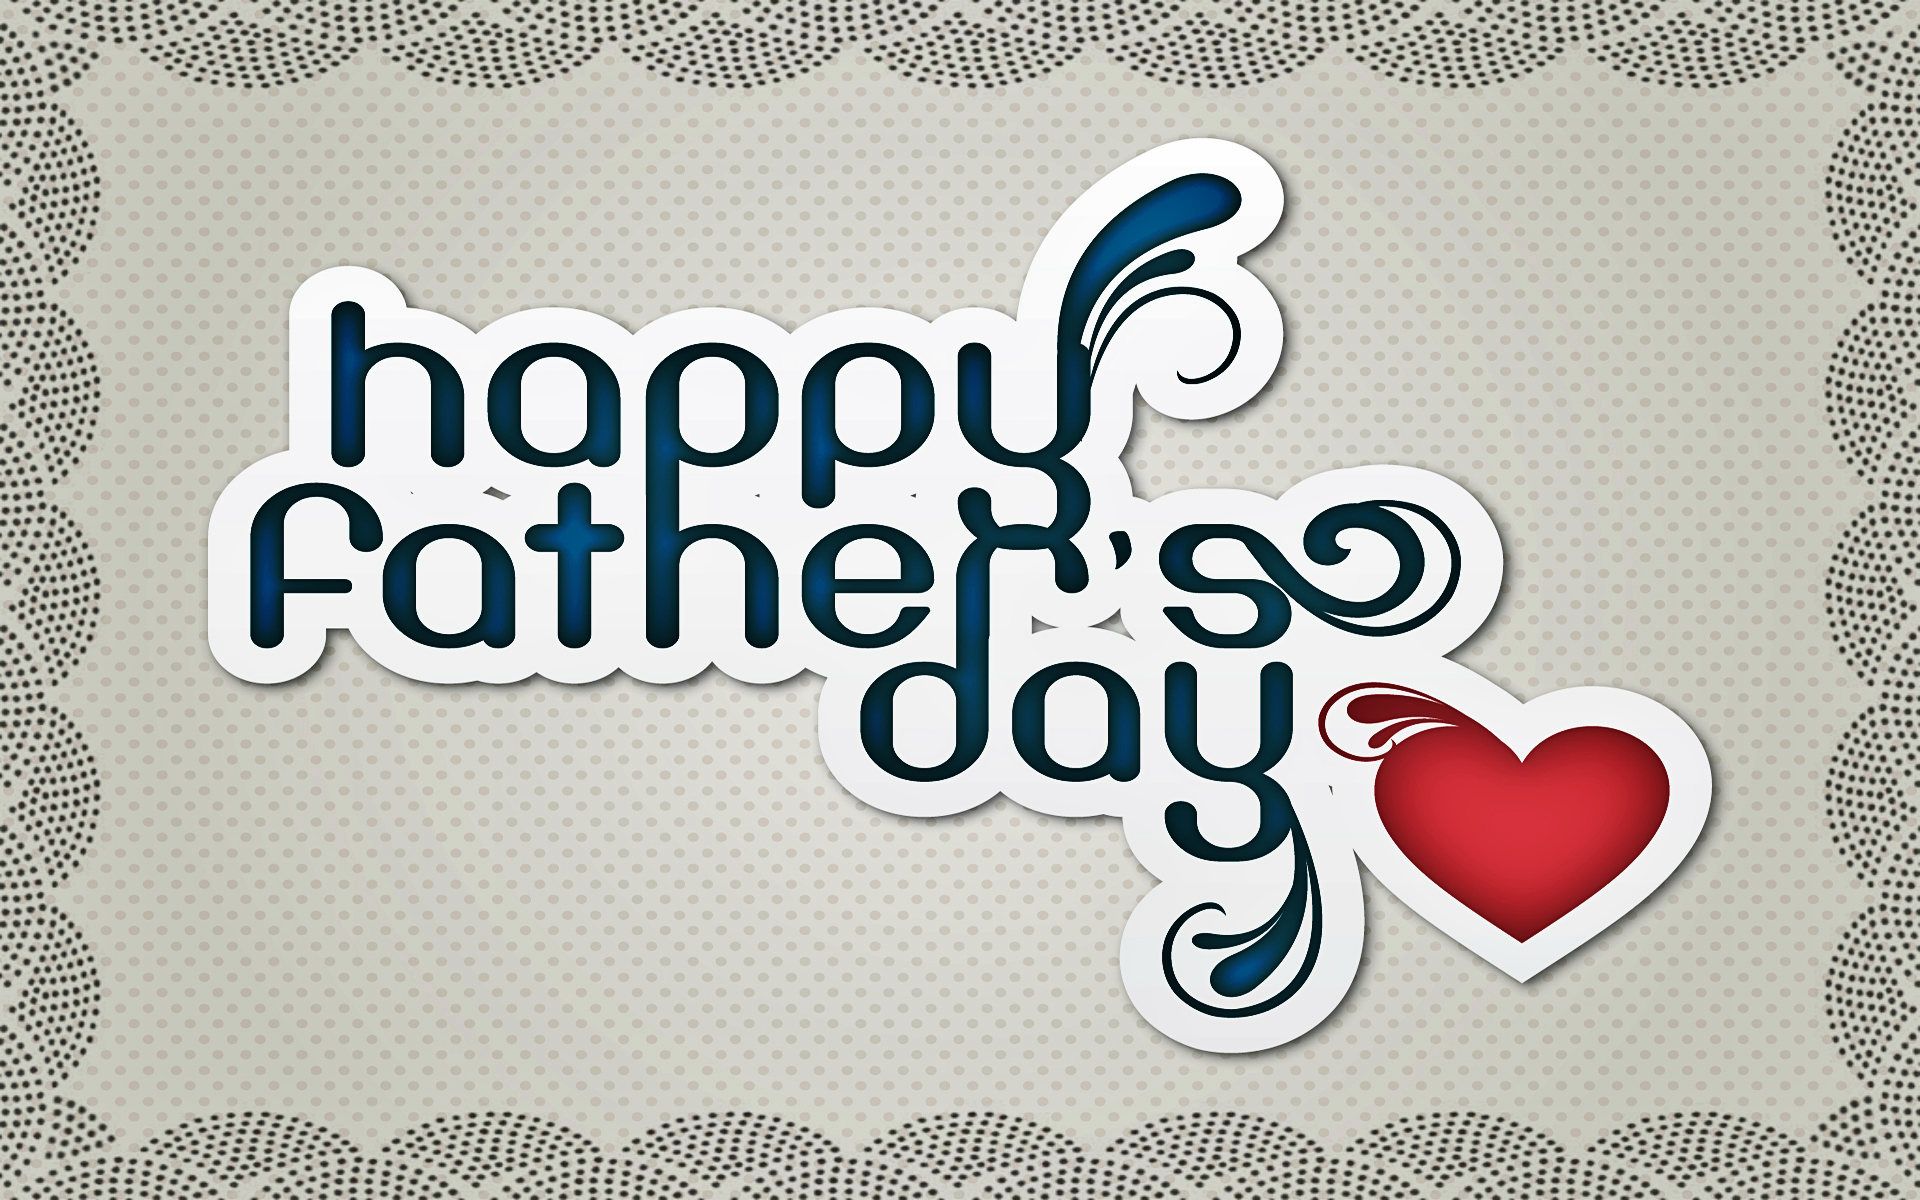 Images Of Fathers Day - Happy Father's Day With Love - HD Wallpaper 